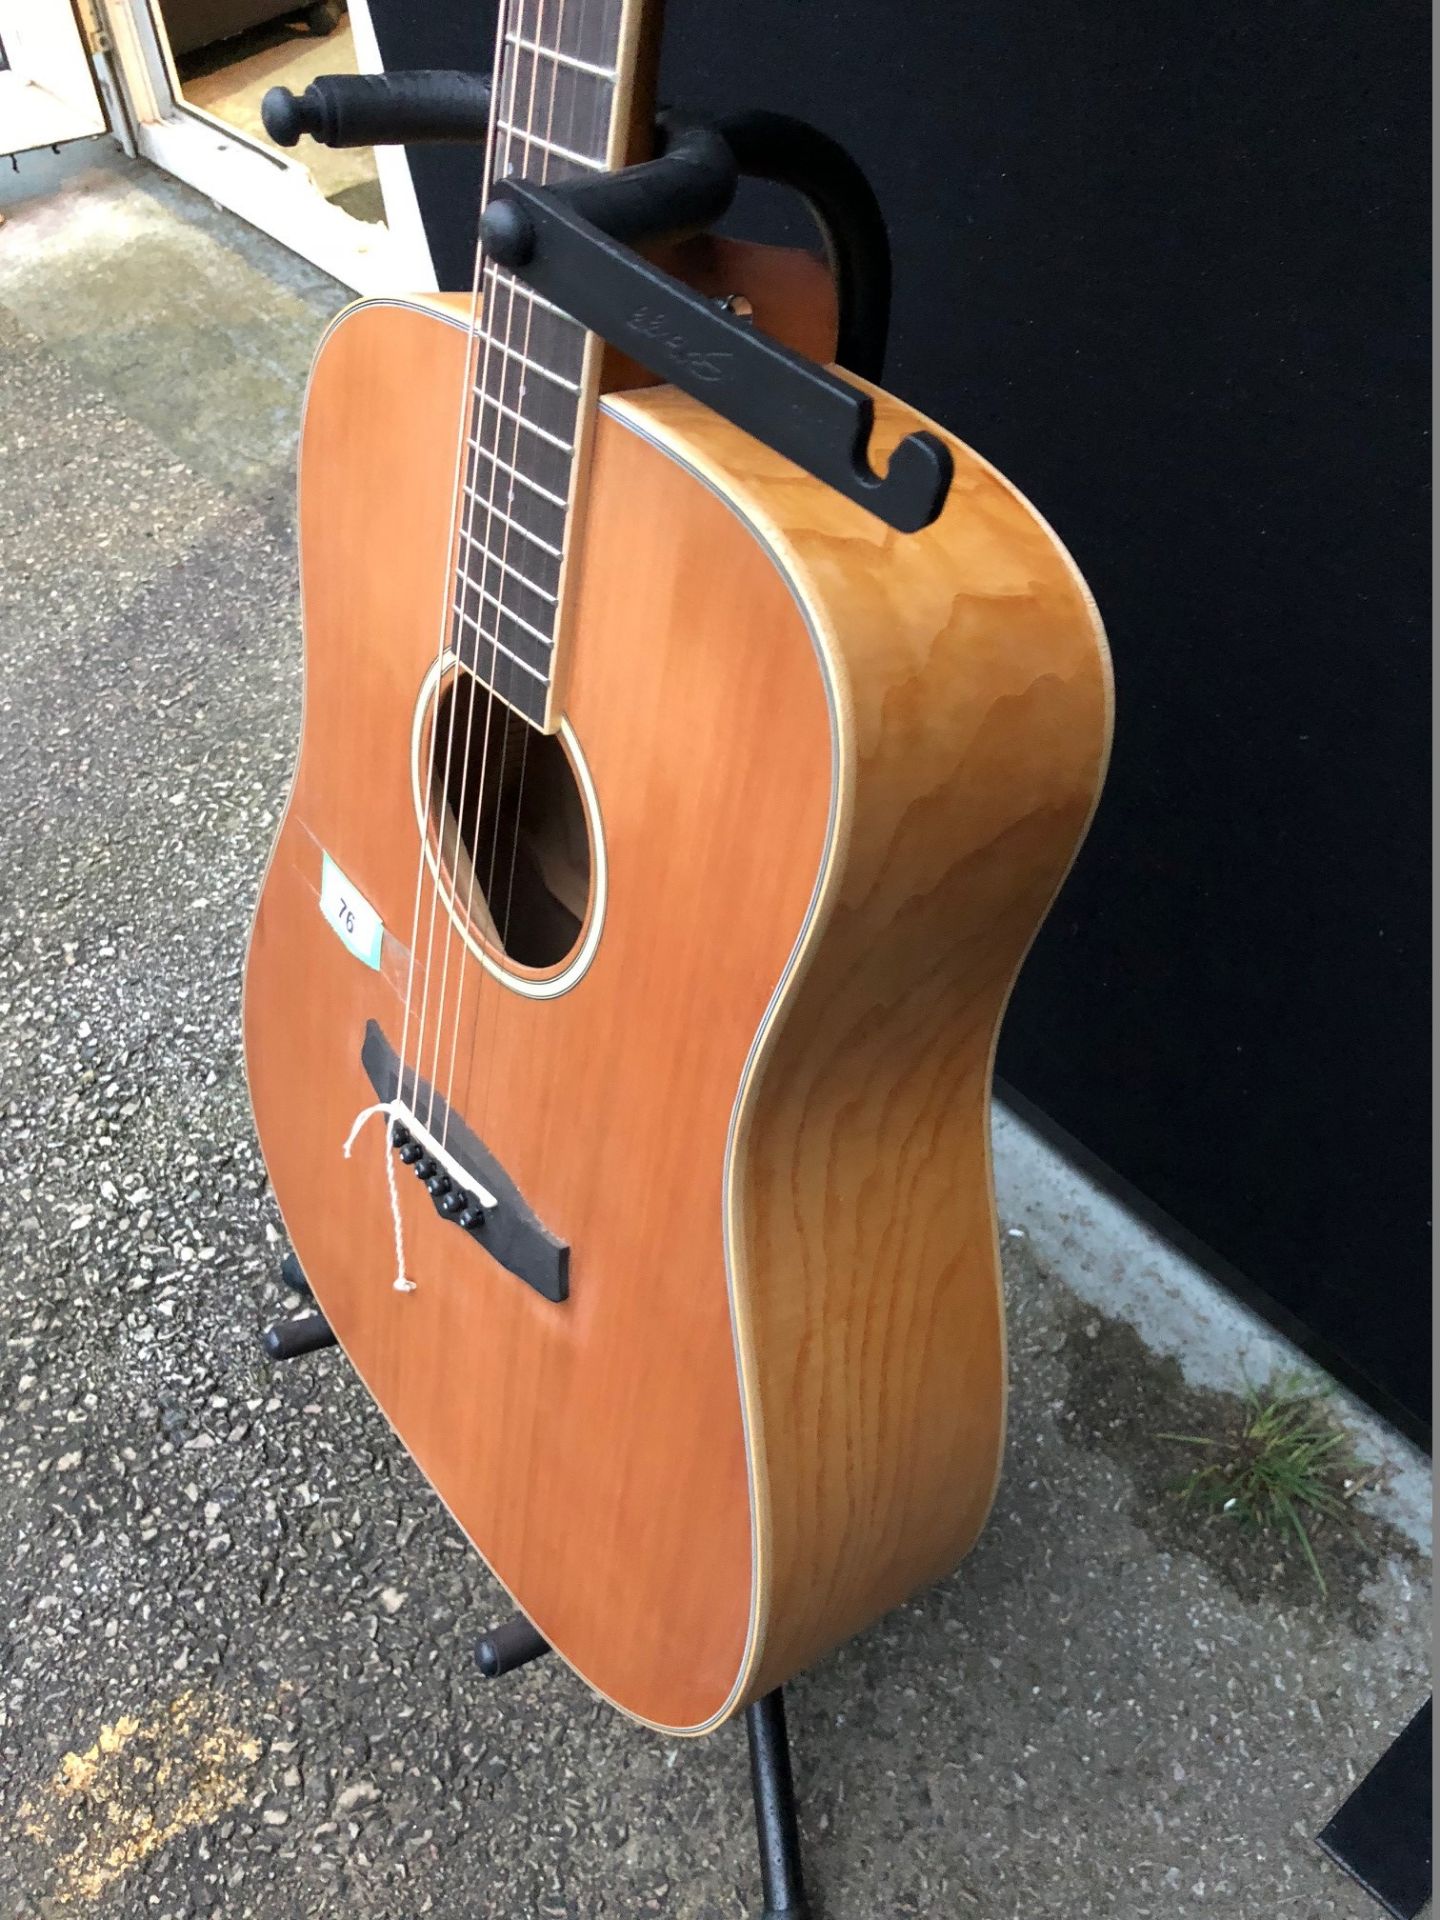 Tanglewood TW11D OL Olive Wood Acoustic Guitar (Brand New Ex Display - RRP £299.00) - Image 4 of 6